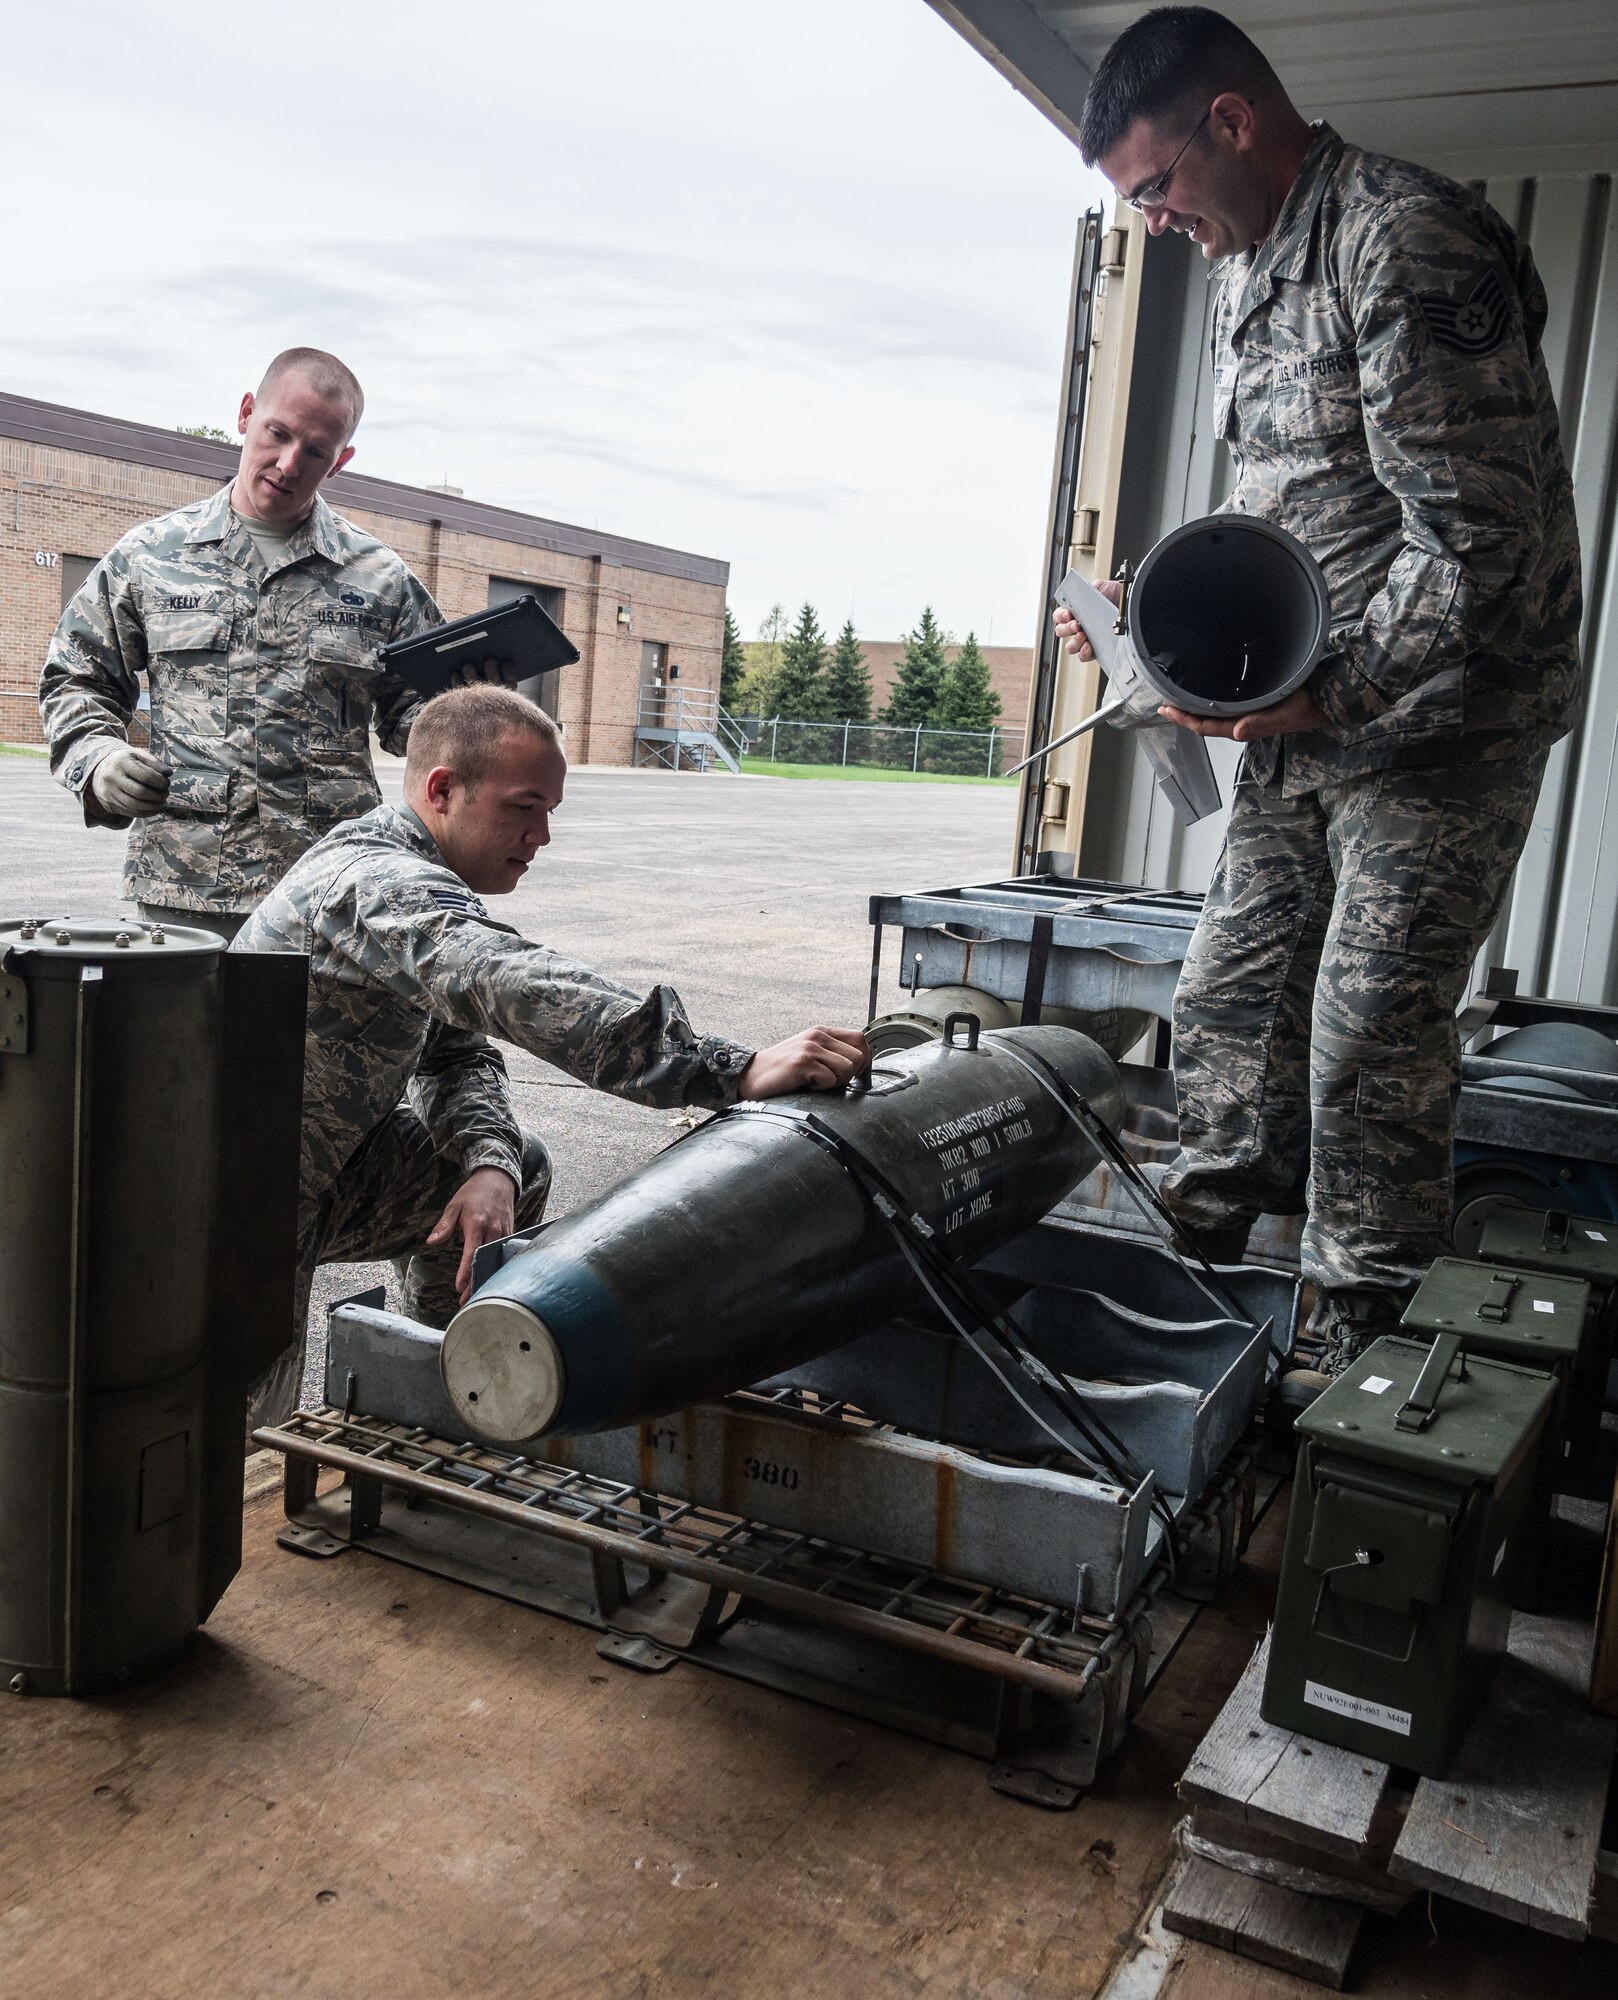 From left, Staff Sgt. Ryan Kelly, Staff Sgt. Andrew Johnson and Tech. Sgt. Matthew Fors inspect 500 pound bombs used for training by Explosive Ordnance Disposal. (Air Force Photo/Paul Zadach)